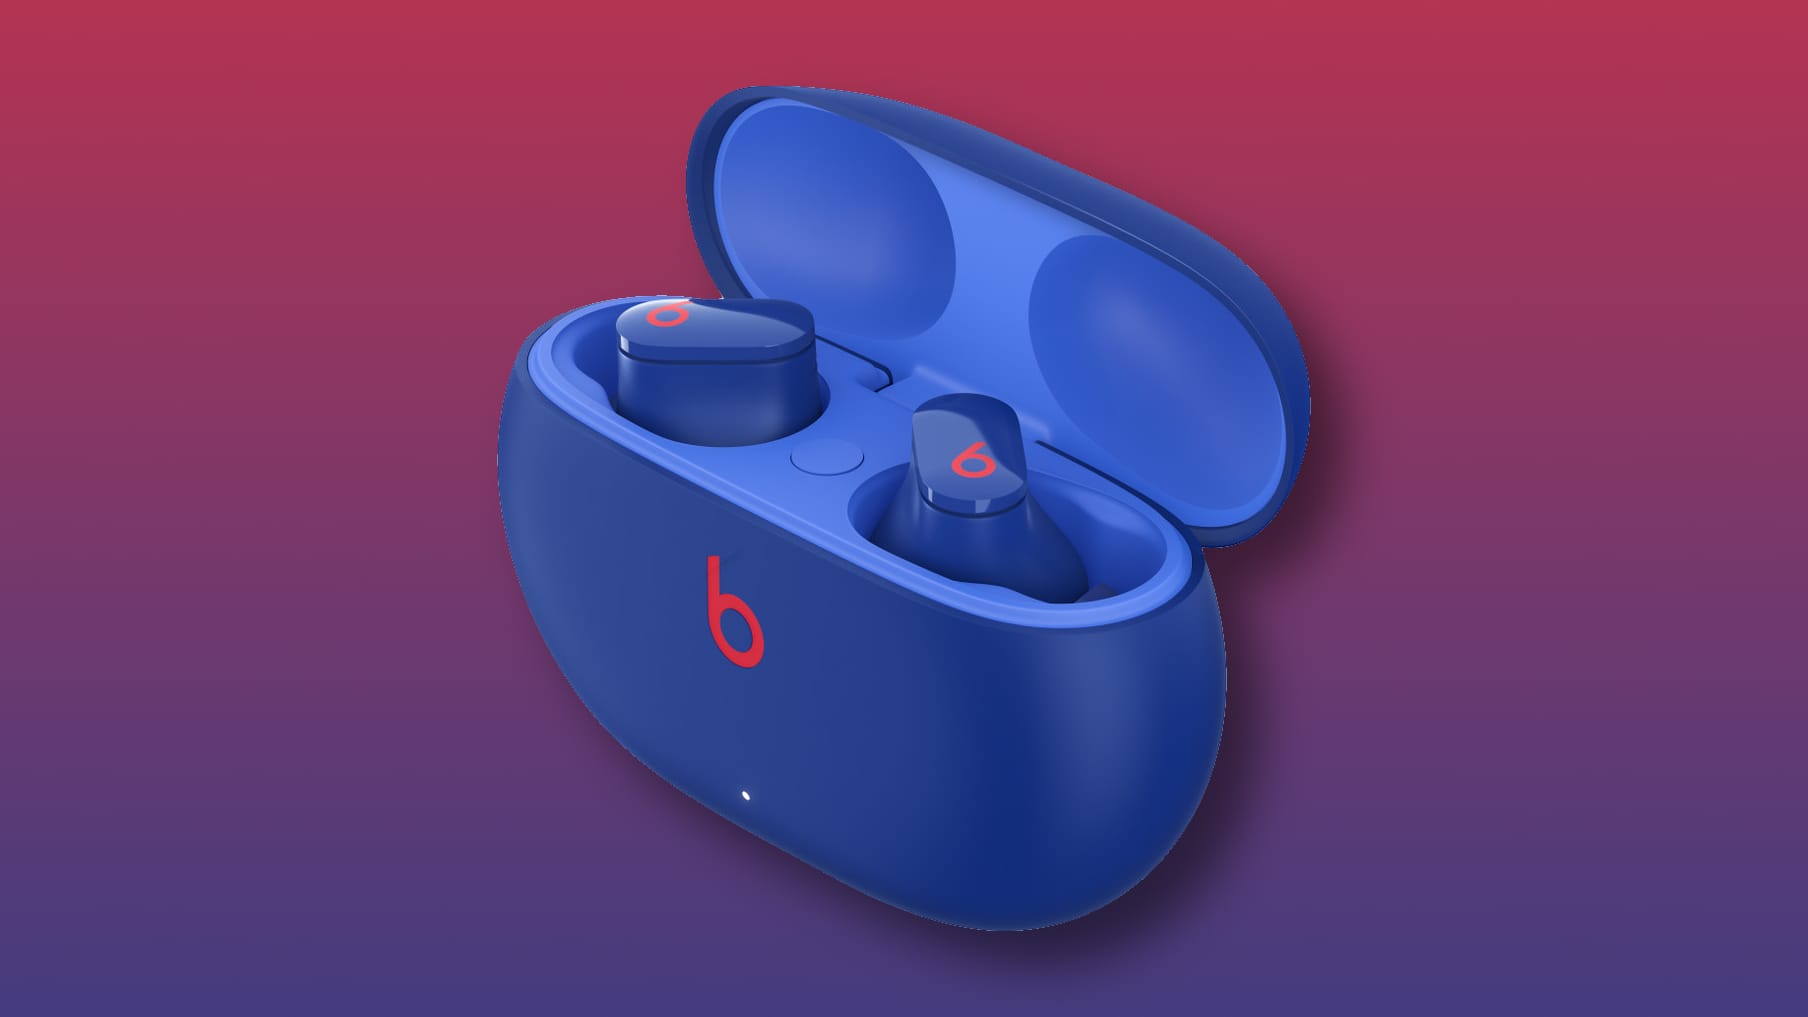 Marketing image displaying an isometric view of the Beat Studio Pro earbuds in the charging case, with the lid open 